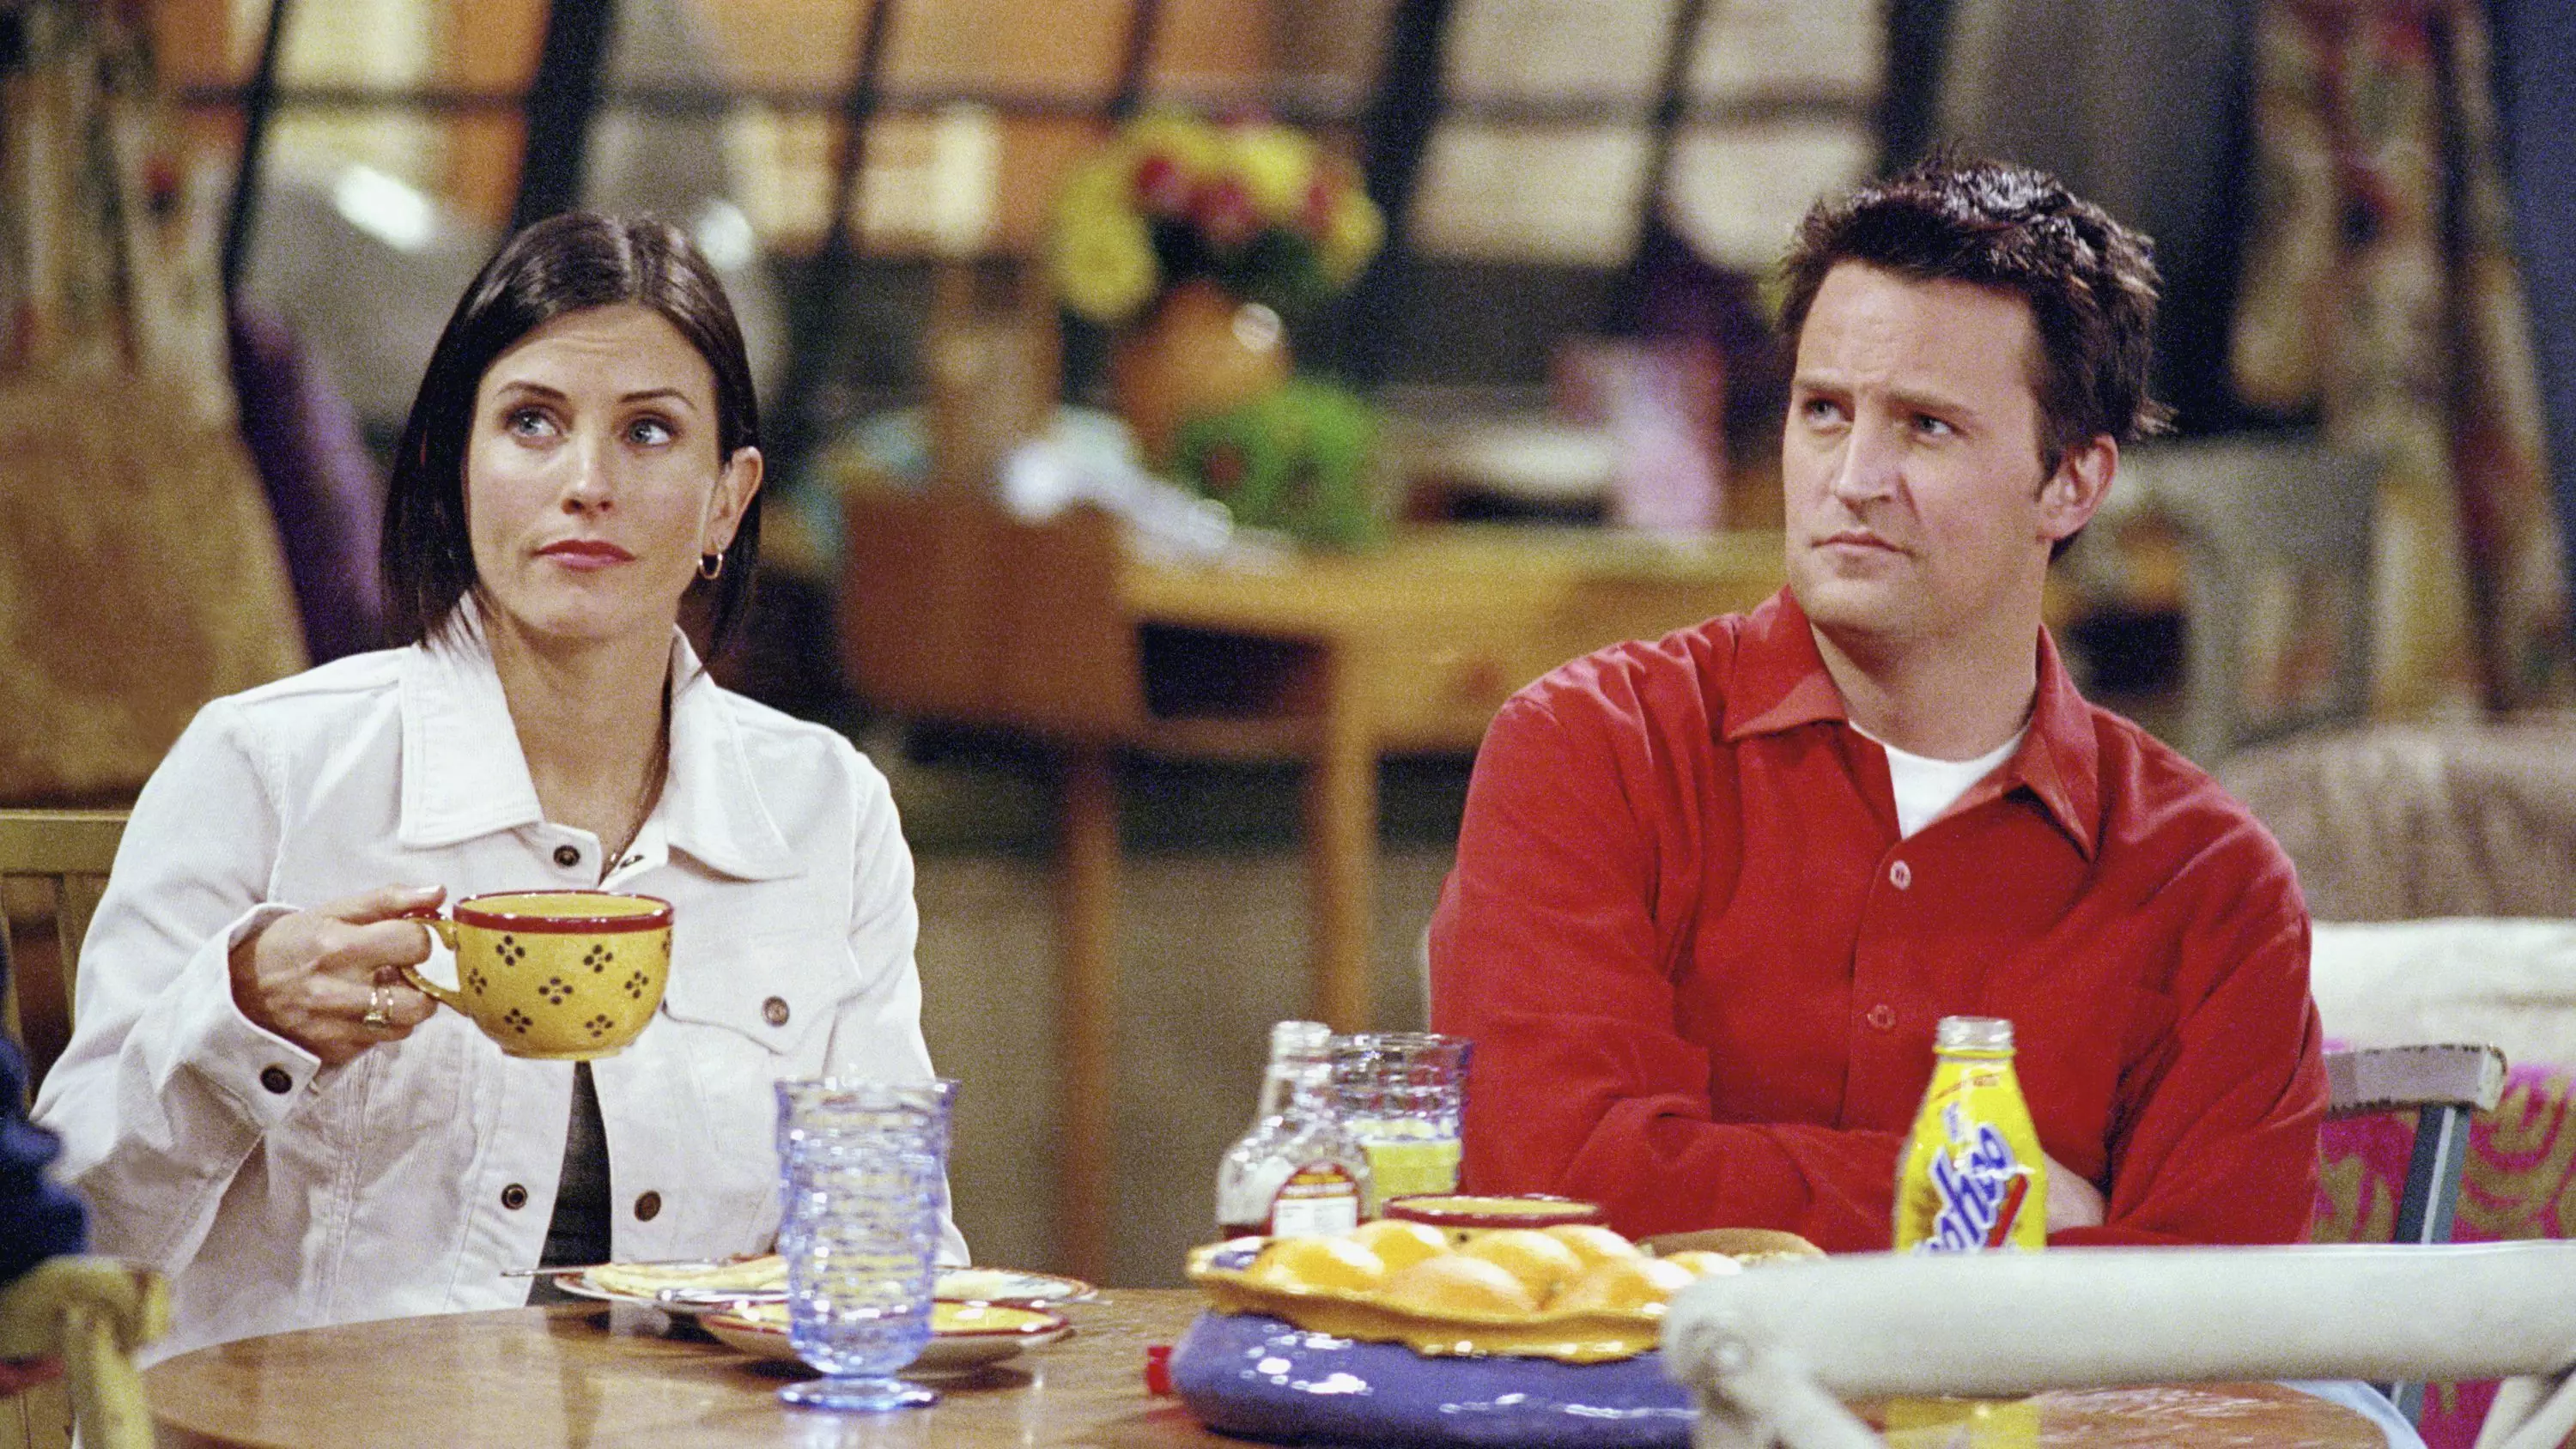 This 'Friends' couple is still as hilarious despite the show ending back in 2004 (